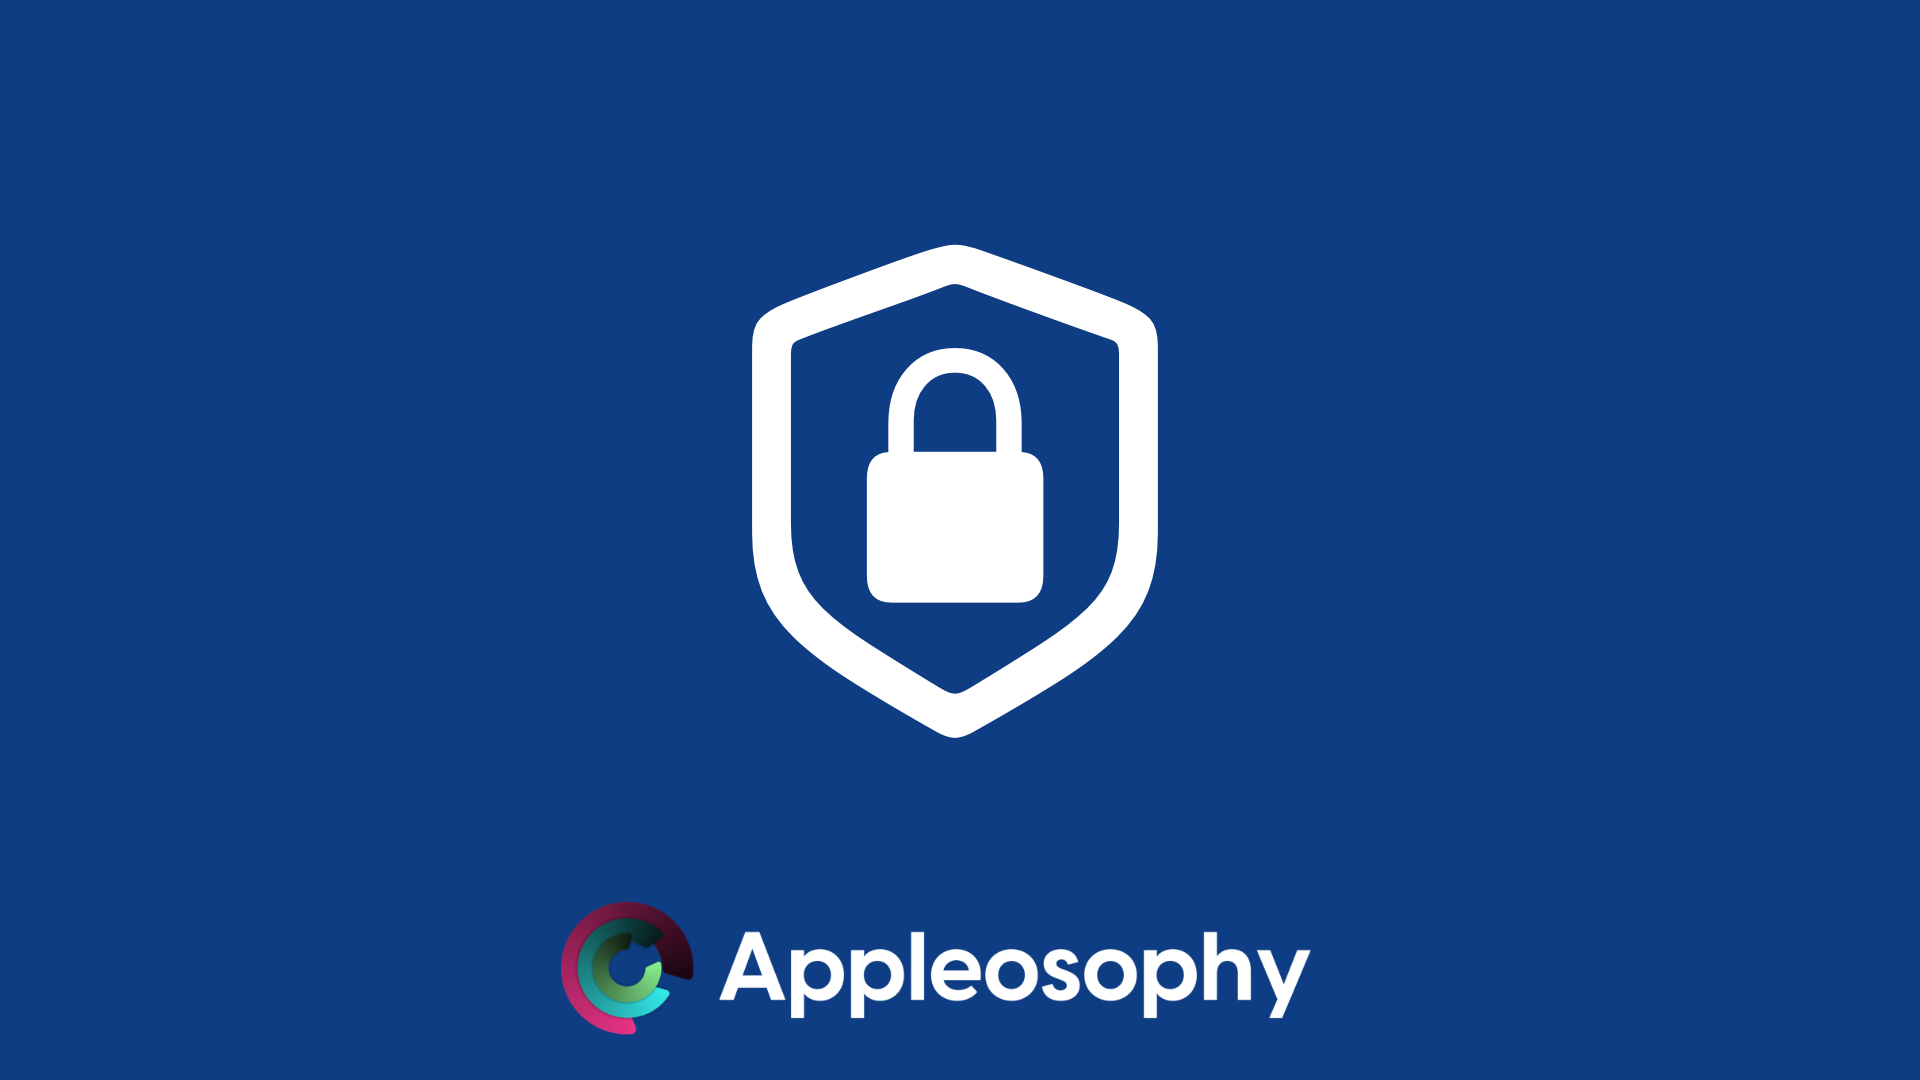 Appleosophy Launches Secure Anonymous Tips Portal Powered by GlobaLeaks